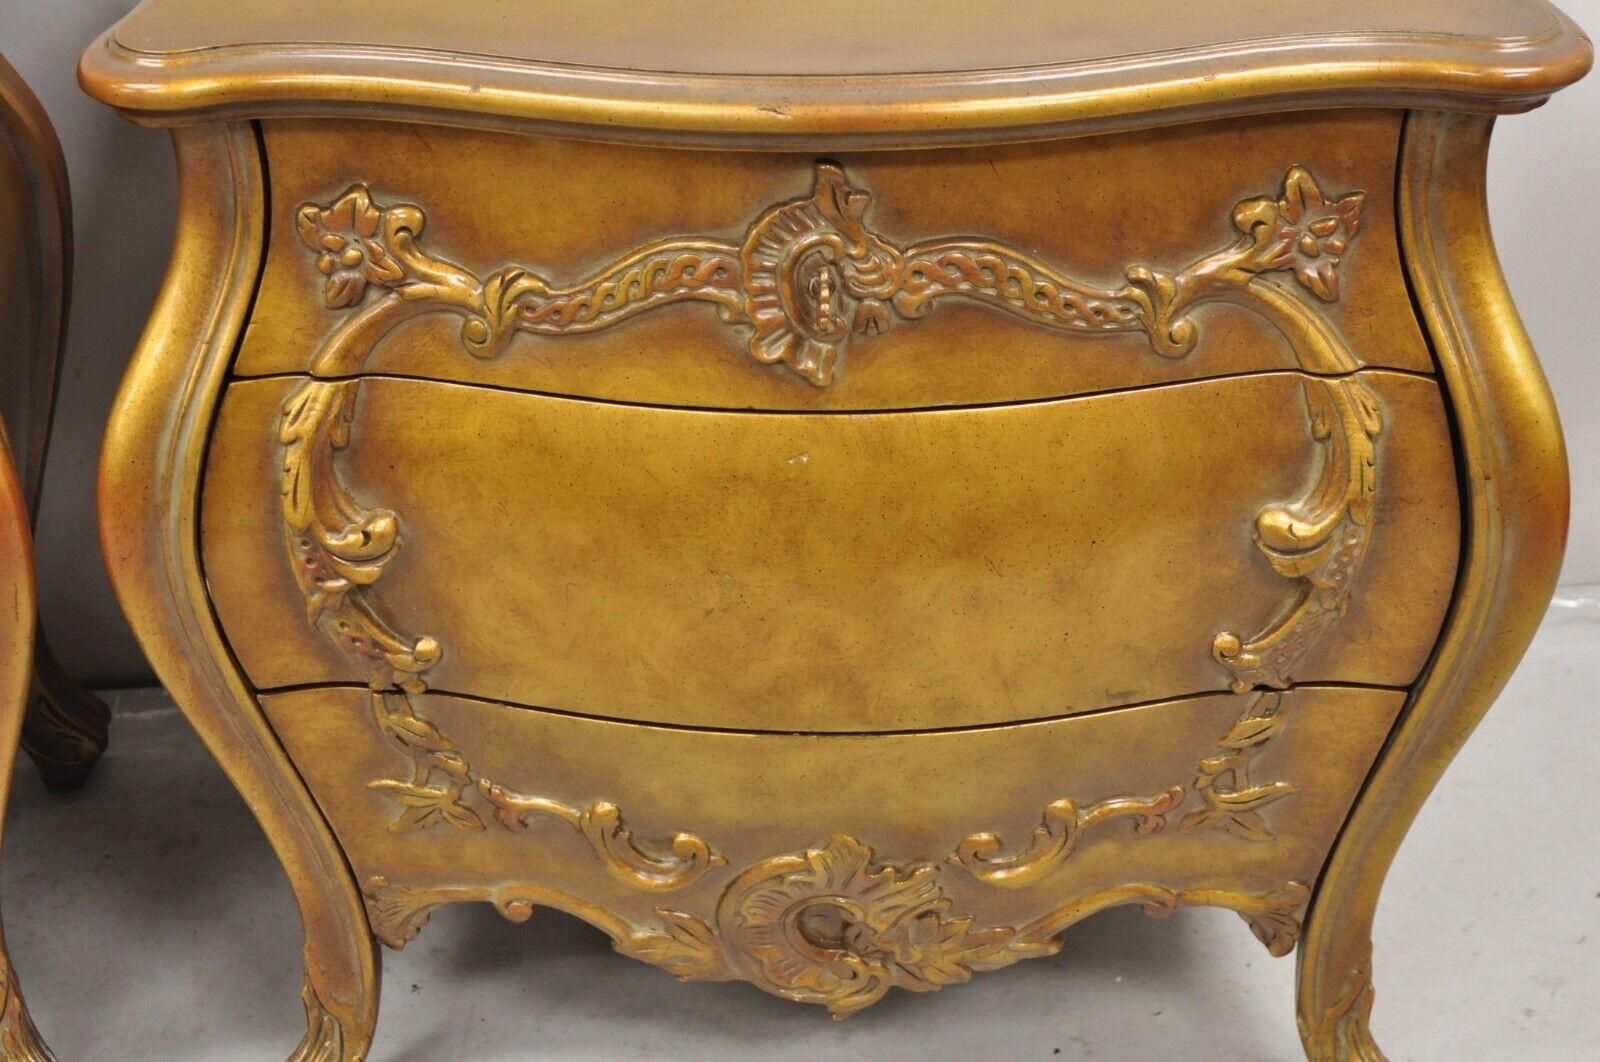 Vintage French Rococo Baroque Style Gold Gilt Bombe Nightstands - a Pair For Sale 2